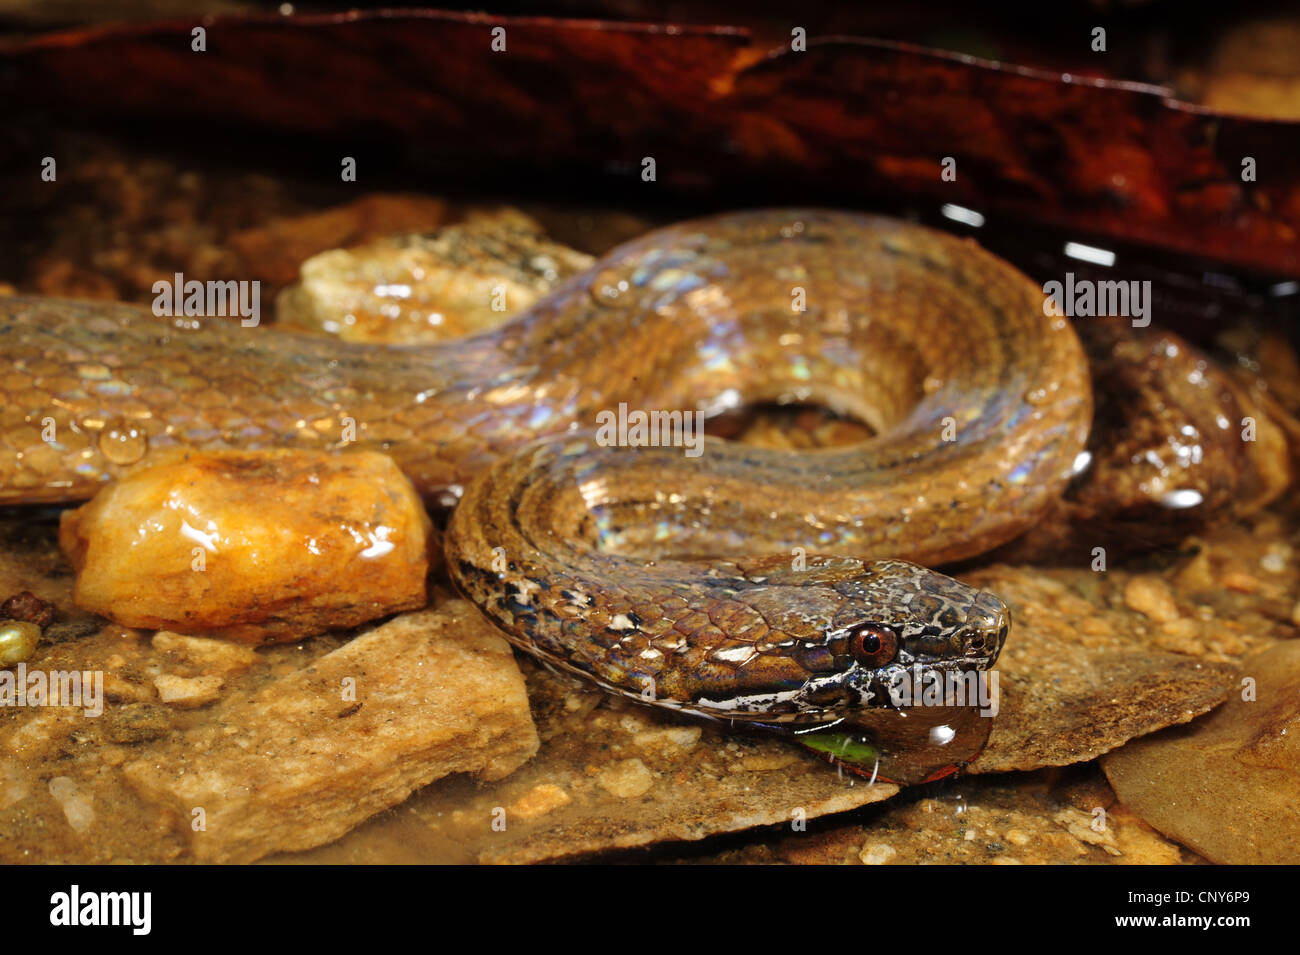 two-spotted snake, mottled-jaw spot-bellied snake (Coniophanes bipunctatus), lateral portrait in a shallow water, Honduras, Roatan Stock Photo